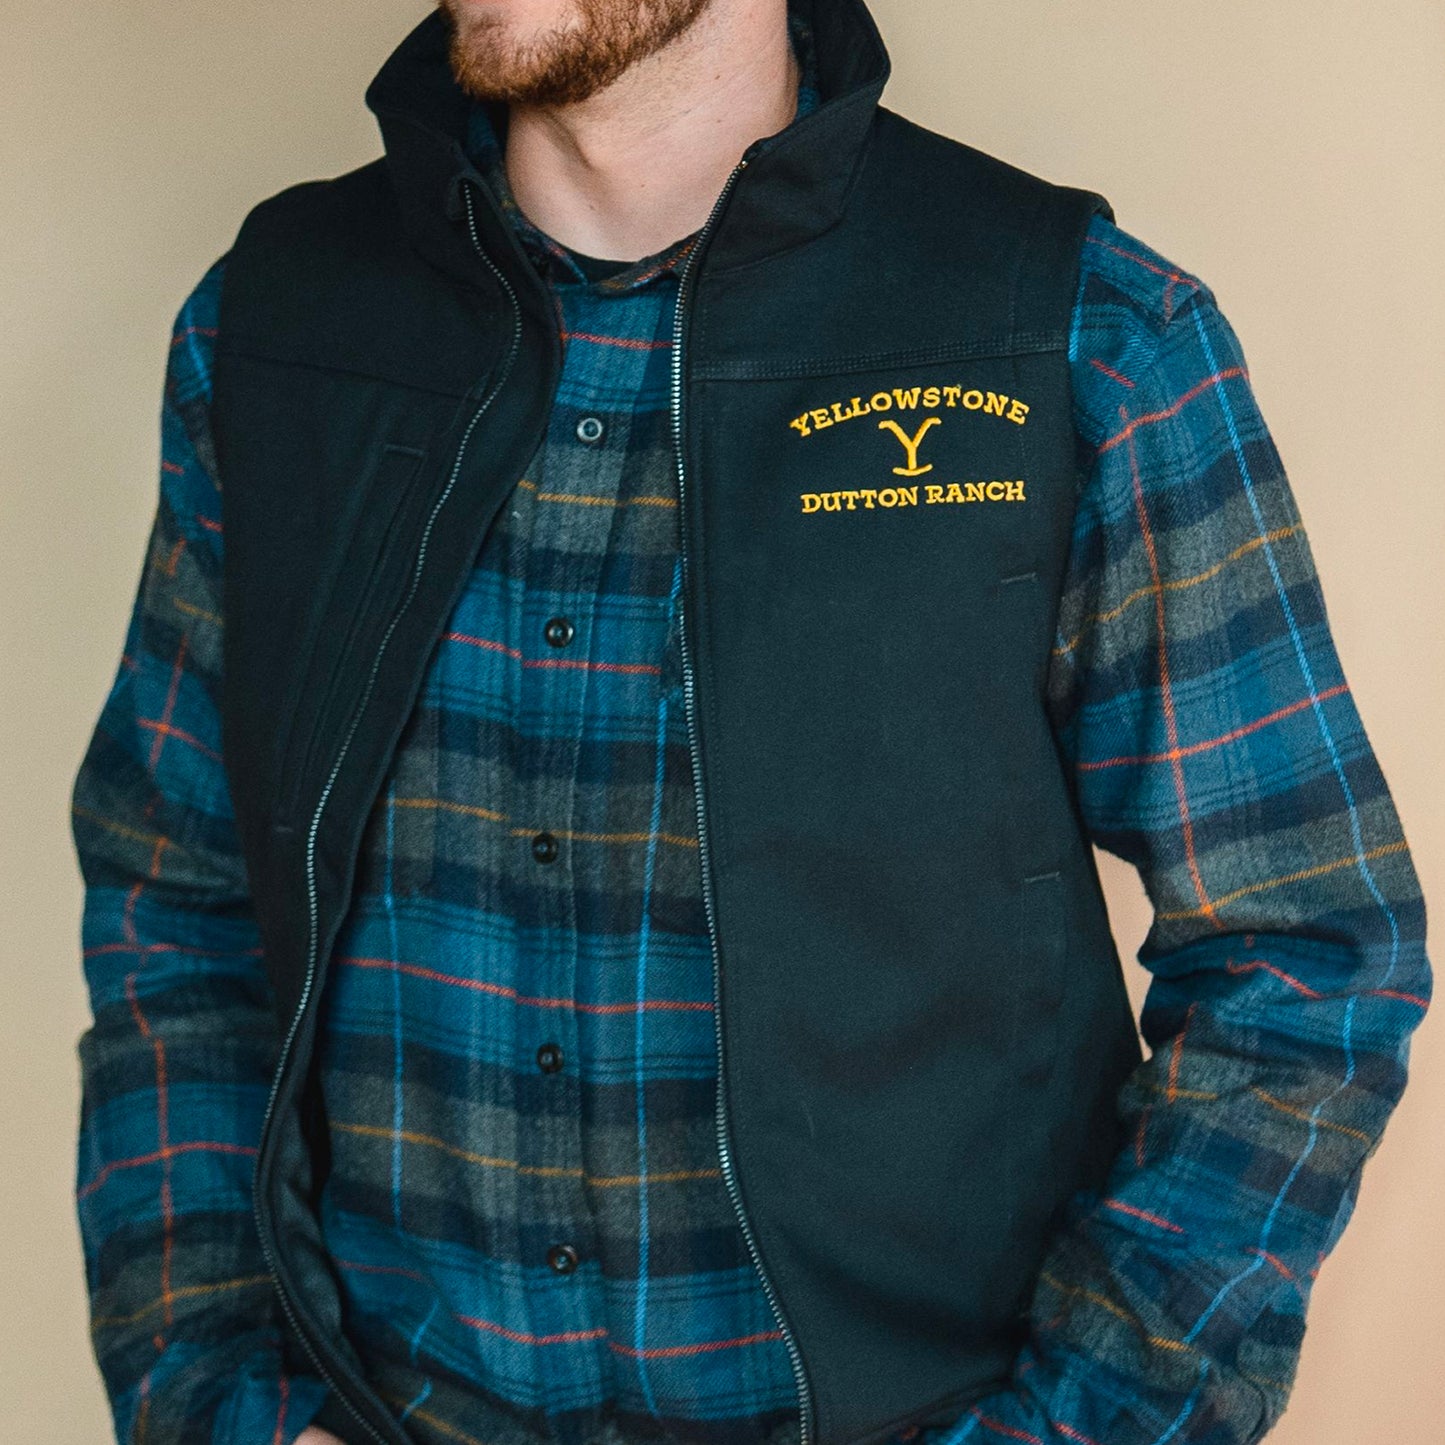 Yellowstone Dutton Ranch Embroidered Navy Plaid Flannel Shirt